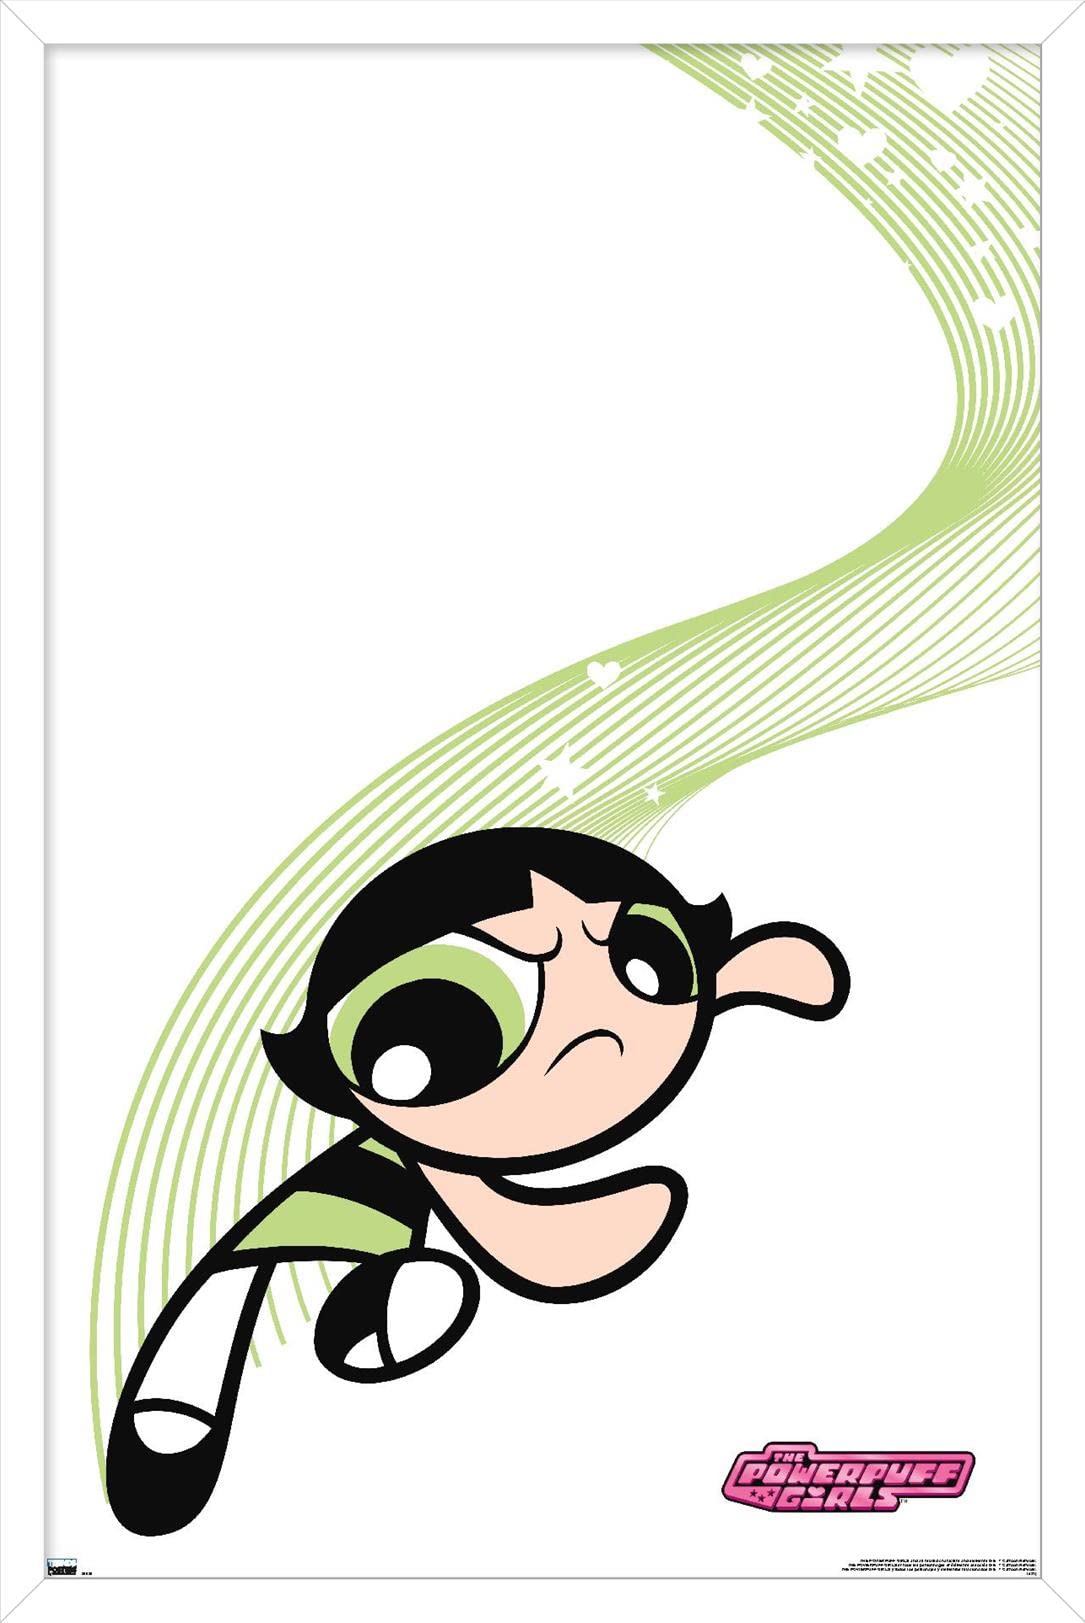 A cartoon character with green hair and white stripes - The Powerpuff Girls, Buttercup